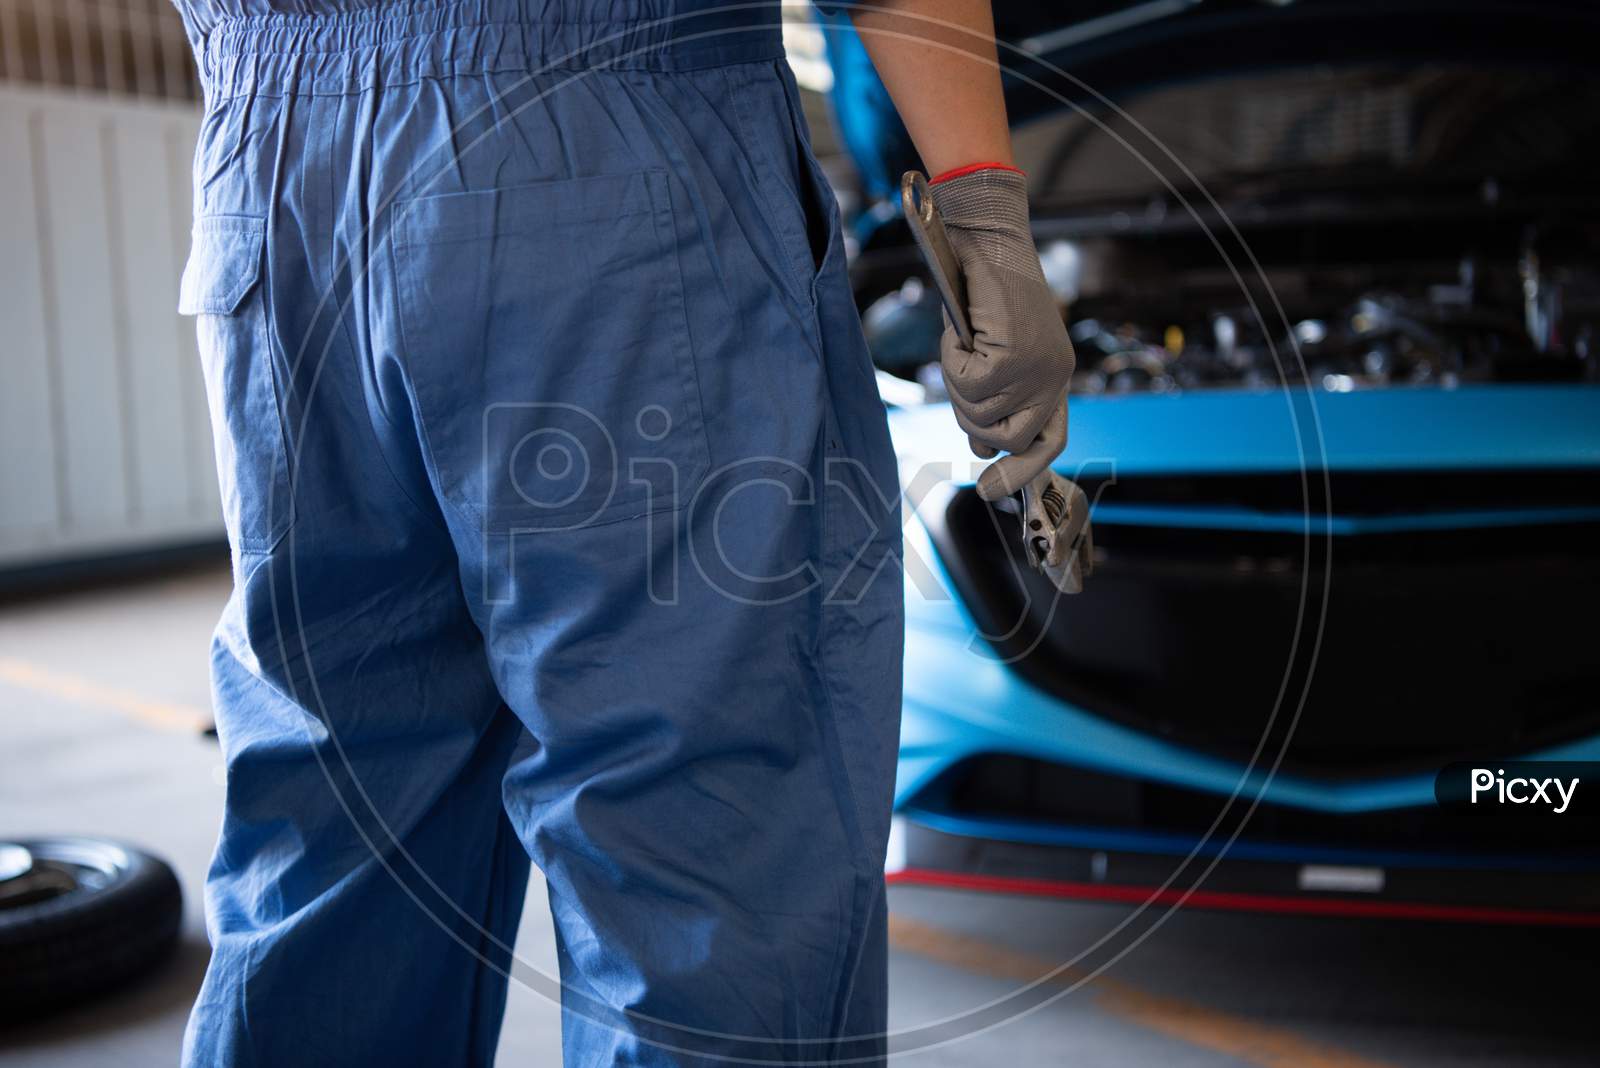 Car Mechanic Holding Wrench For Fixing To Customer Claim Order In A Auto Repair Garage Workshop. Engine Repair Service. People Occupation And Business Job. Automobile Industry Technical Maintenance